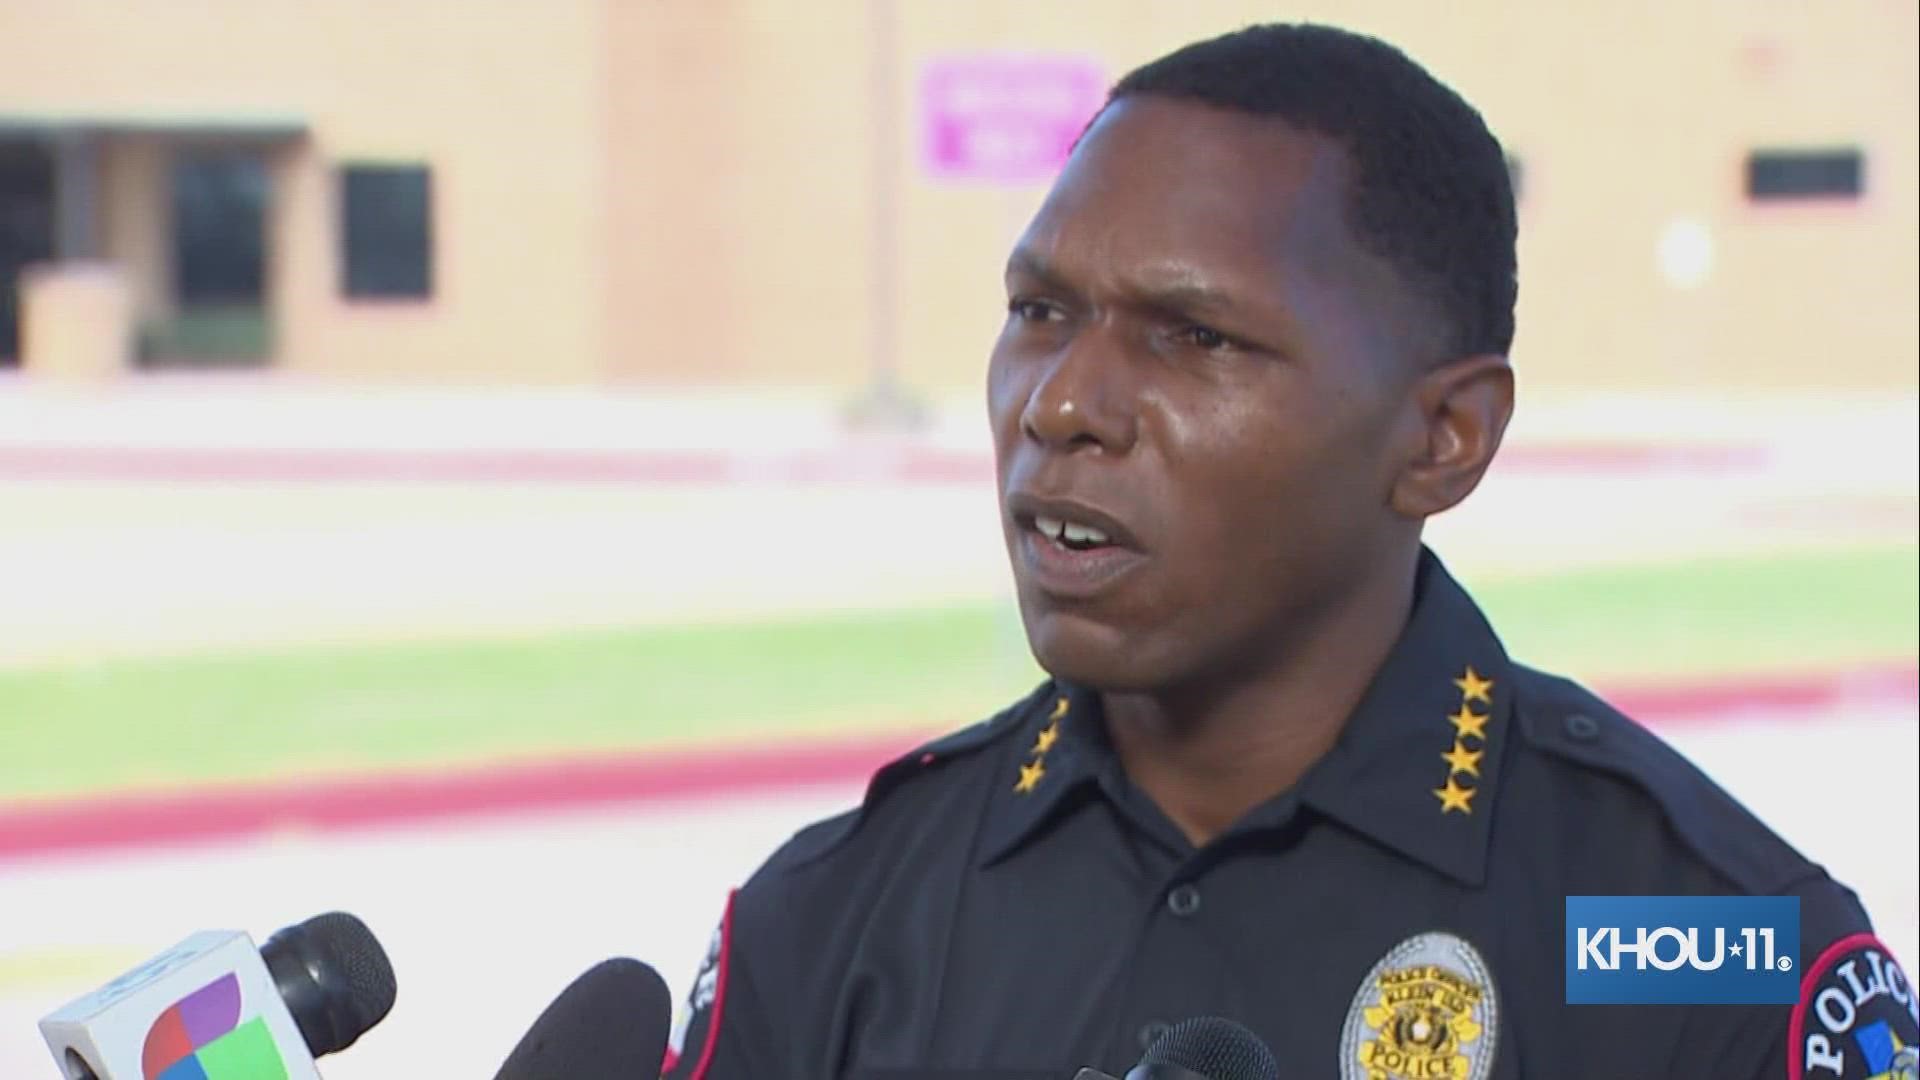 Klein ISD Police Chief Marlon Runnels gave an update after Klein Forest High was evacuated due to a bomb threat.